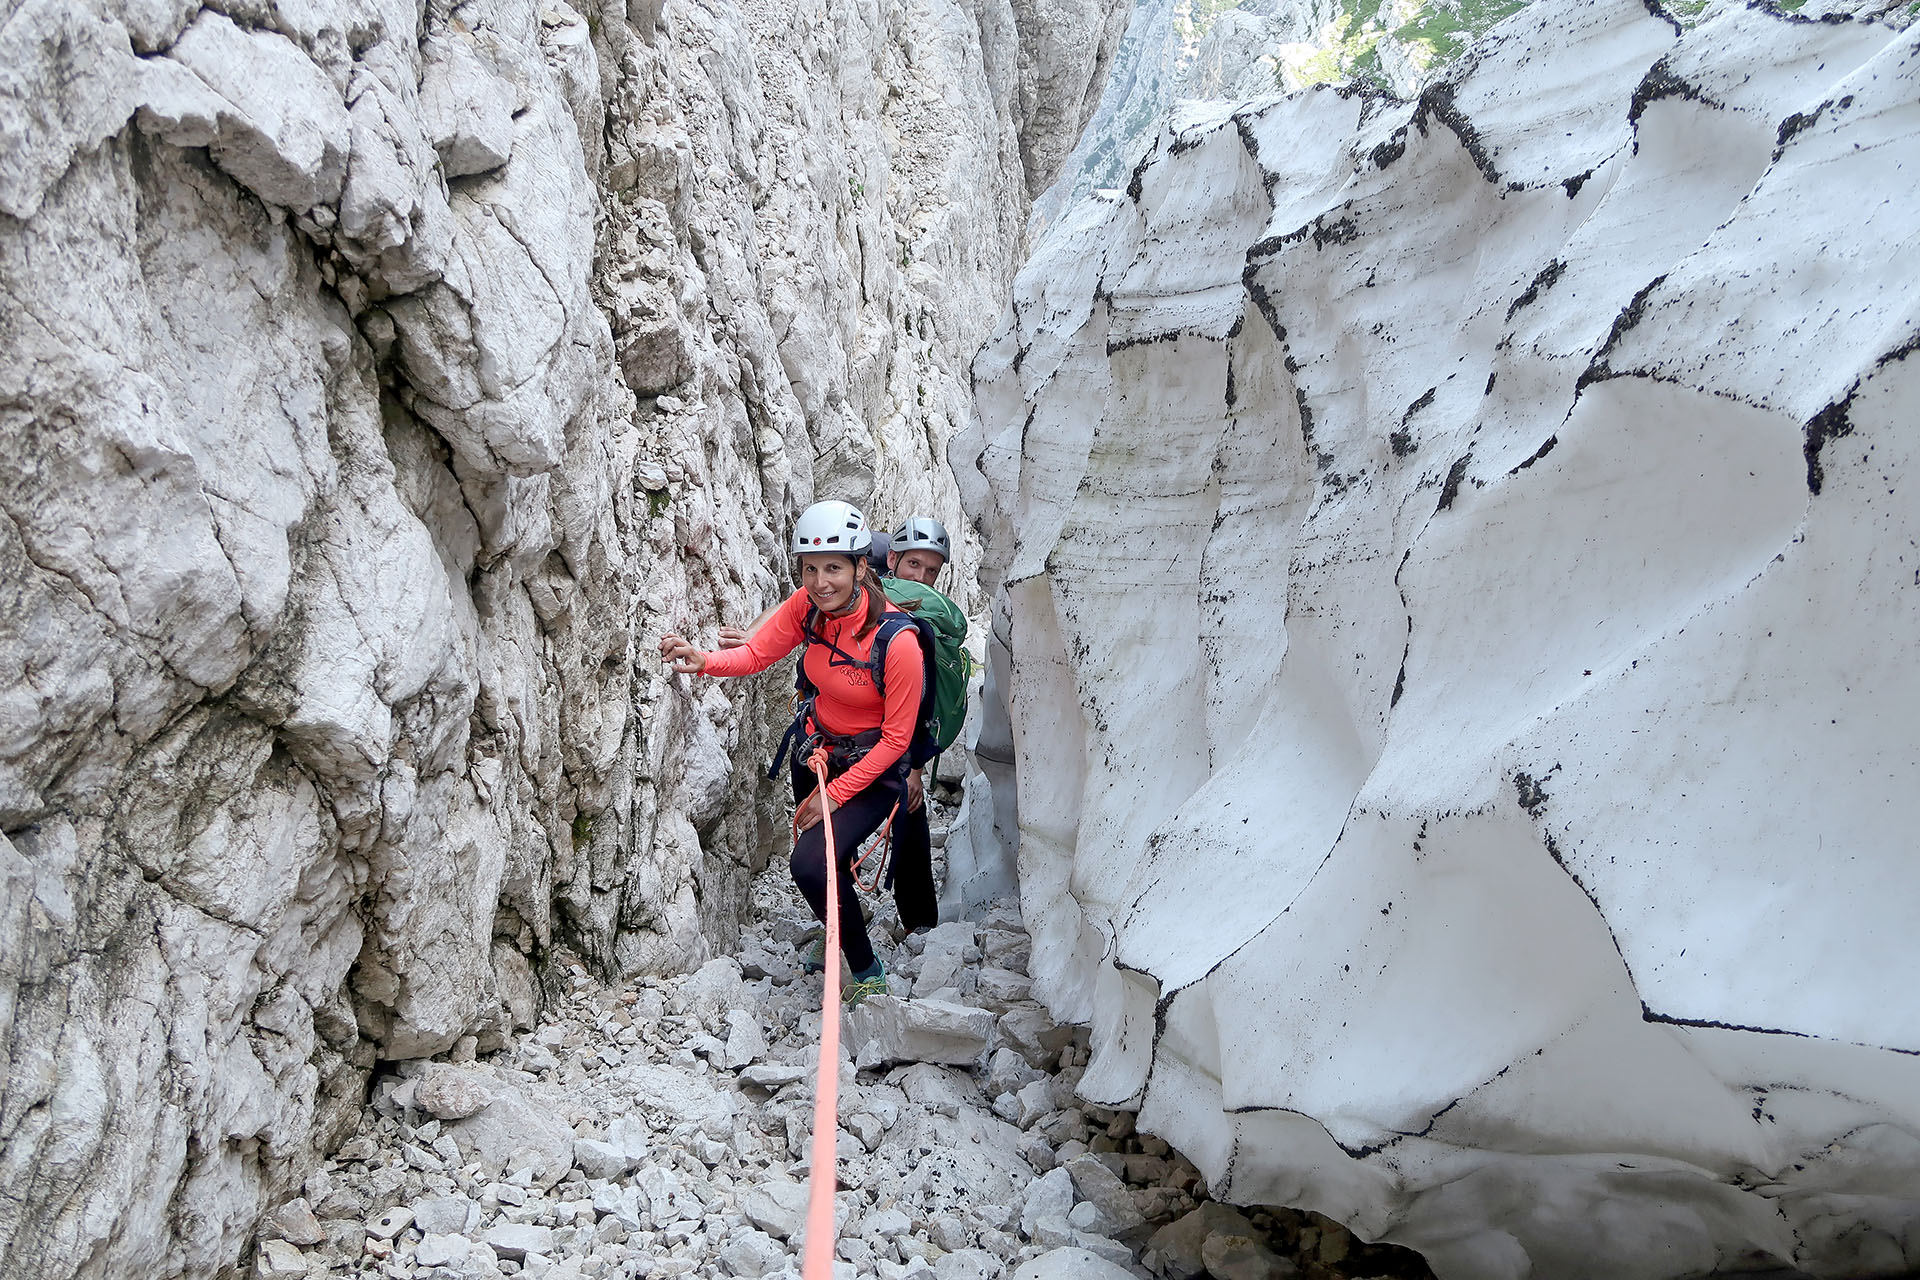 In the Triglav north wall above the German turn - German route